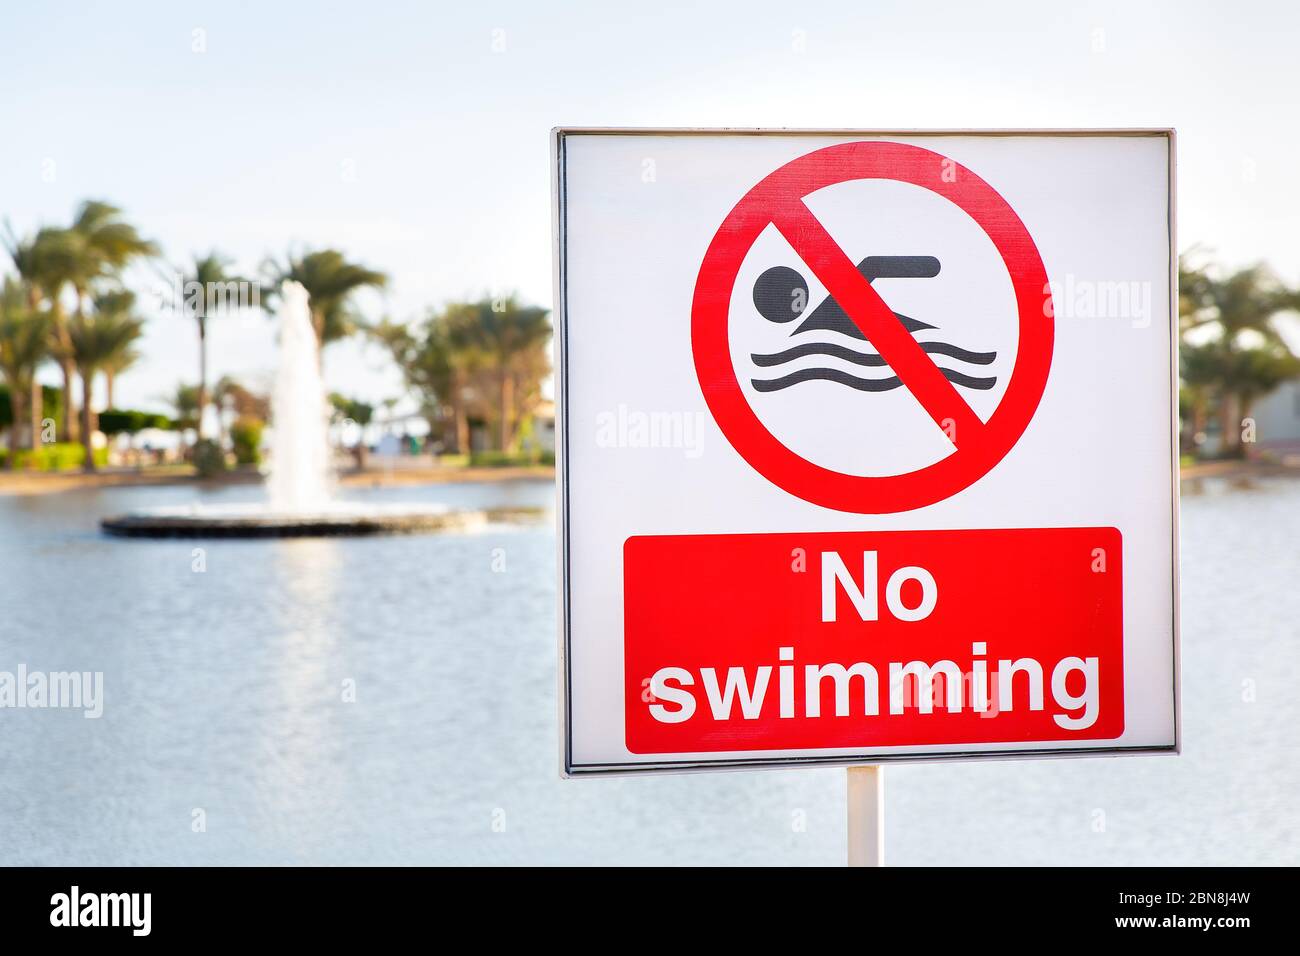 No swimming sign near water of pond in Egypt Stock Photo